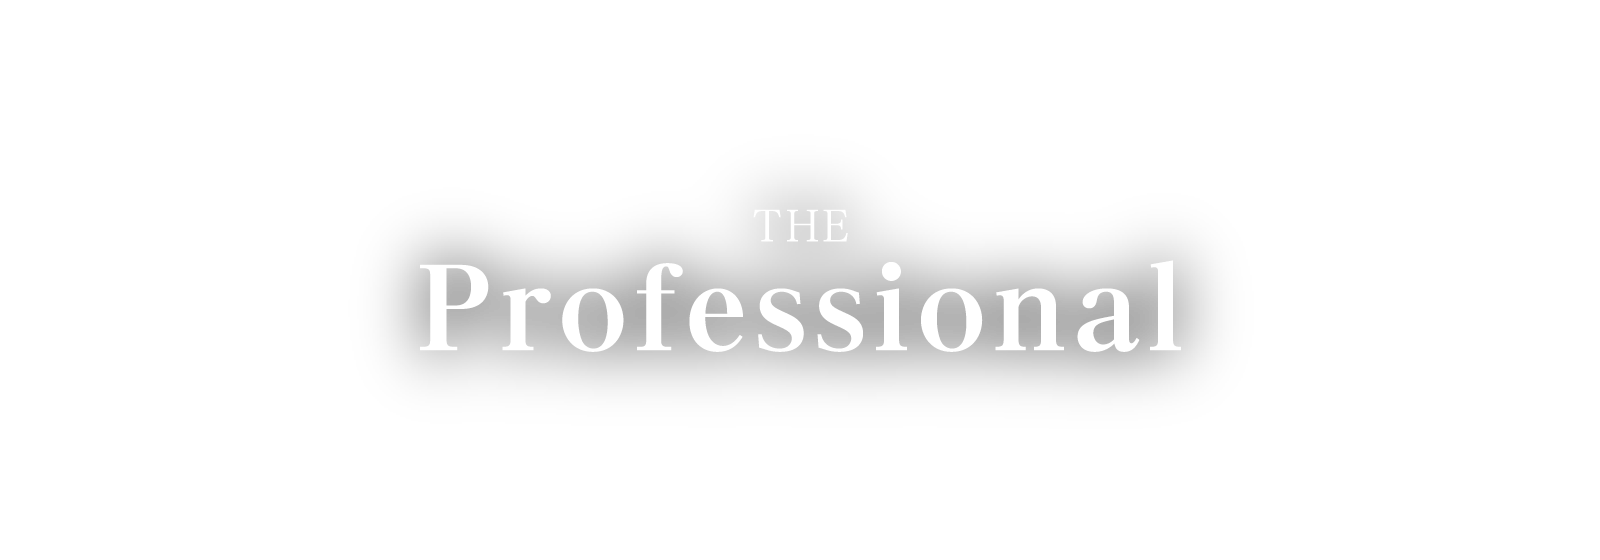 THE Professional